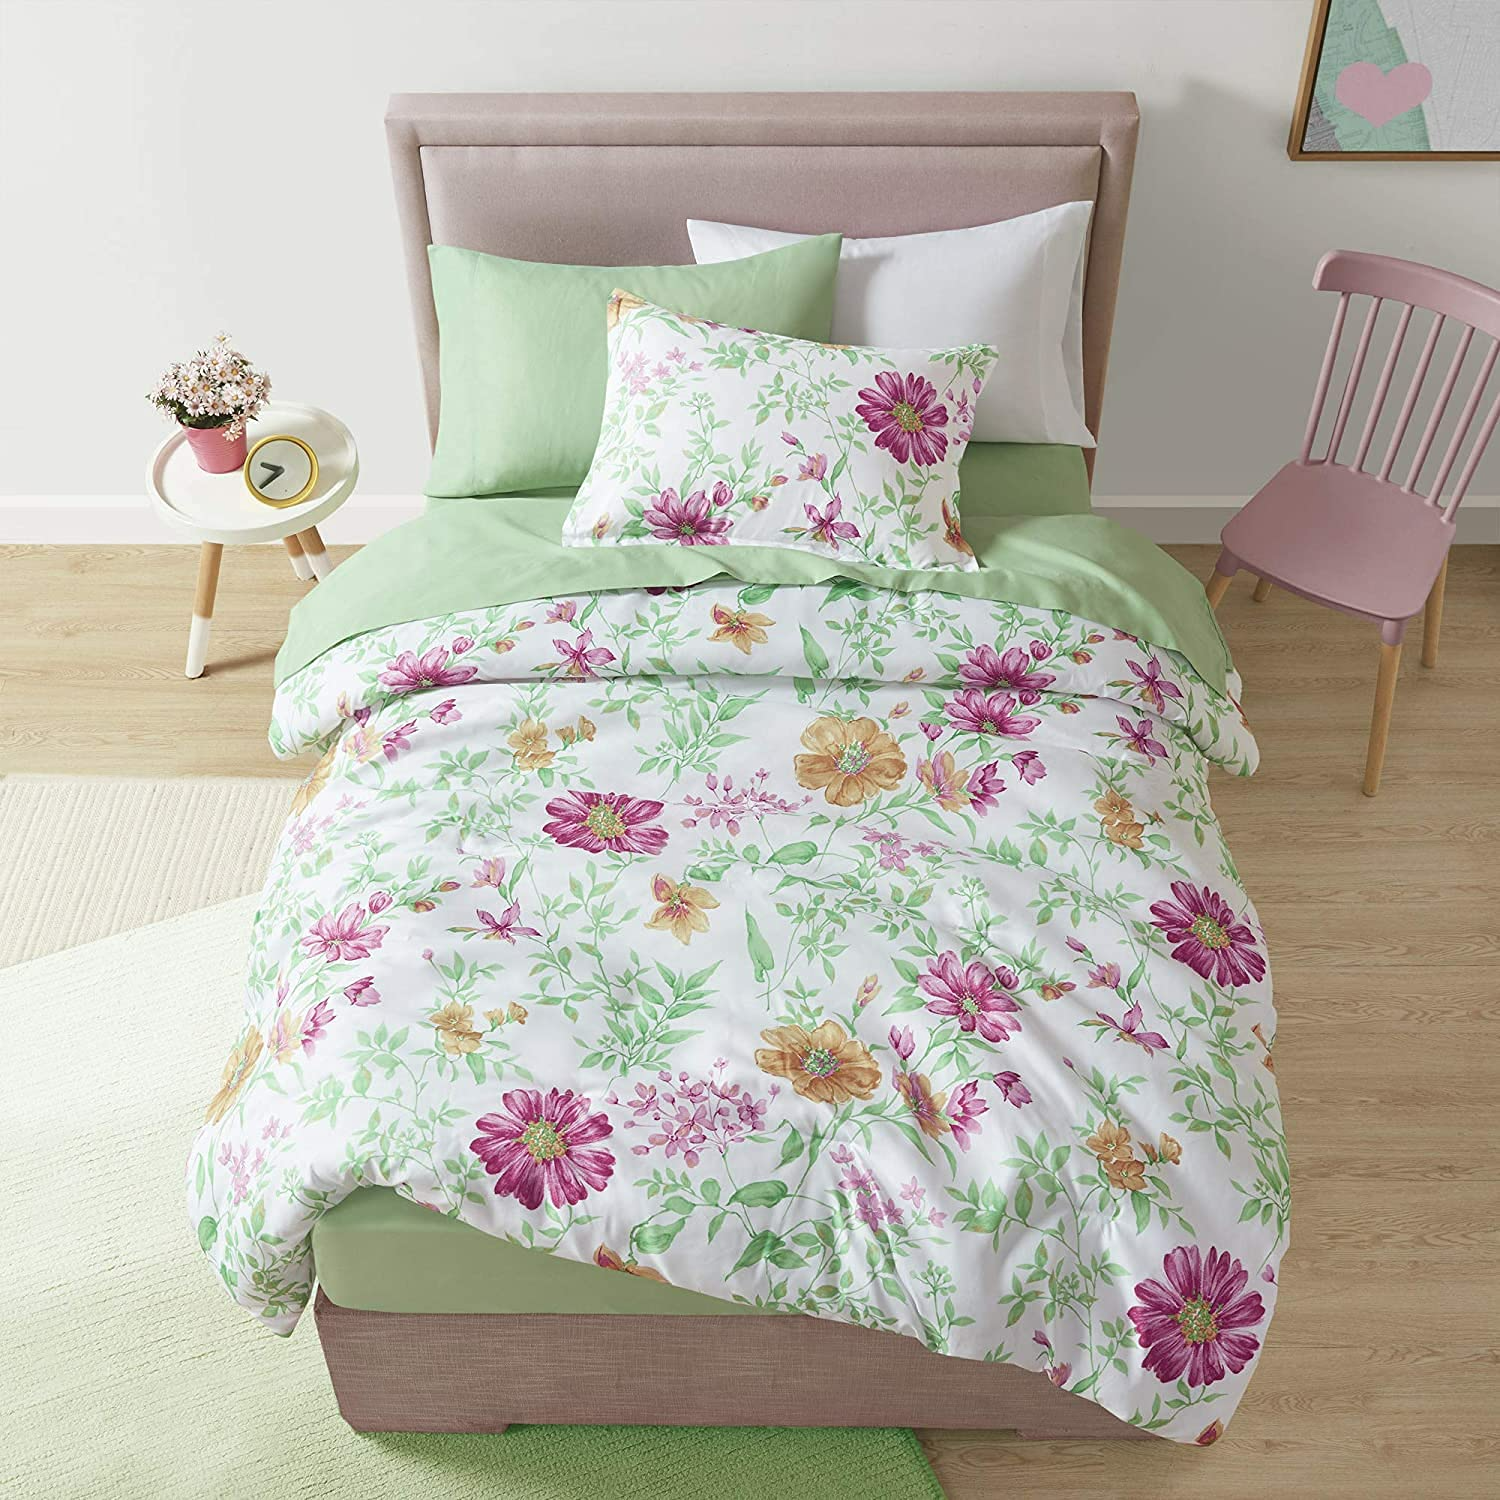 Comfort Spaces 9-Pieces Queen Bed in a Bag Comforter Sets Microfiber Down Alternative Daisies Green with Sheet Set and Side Pockets - image 4 of 12